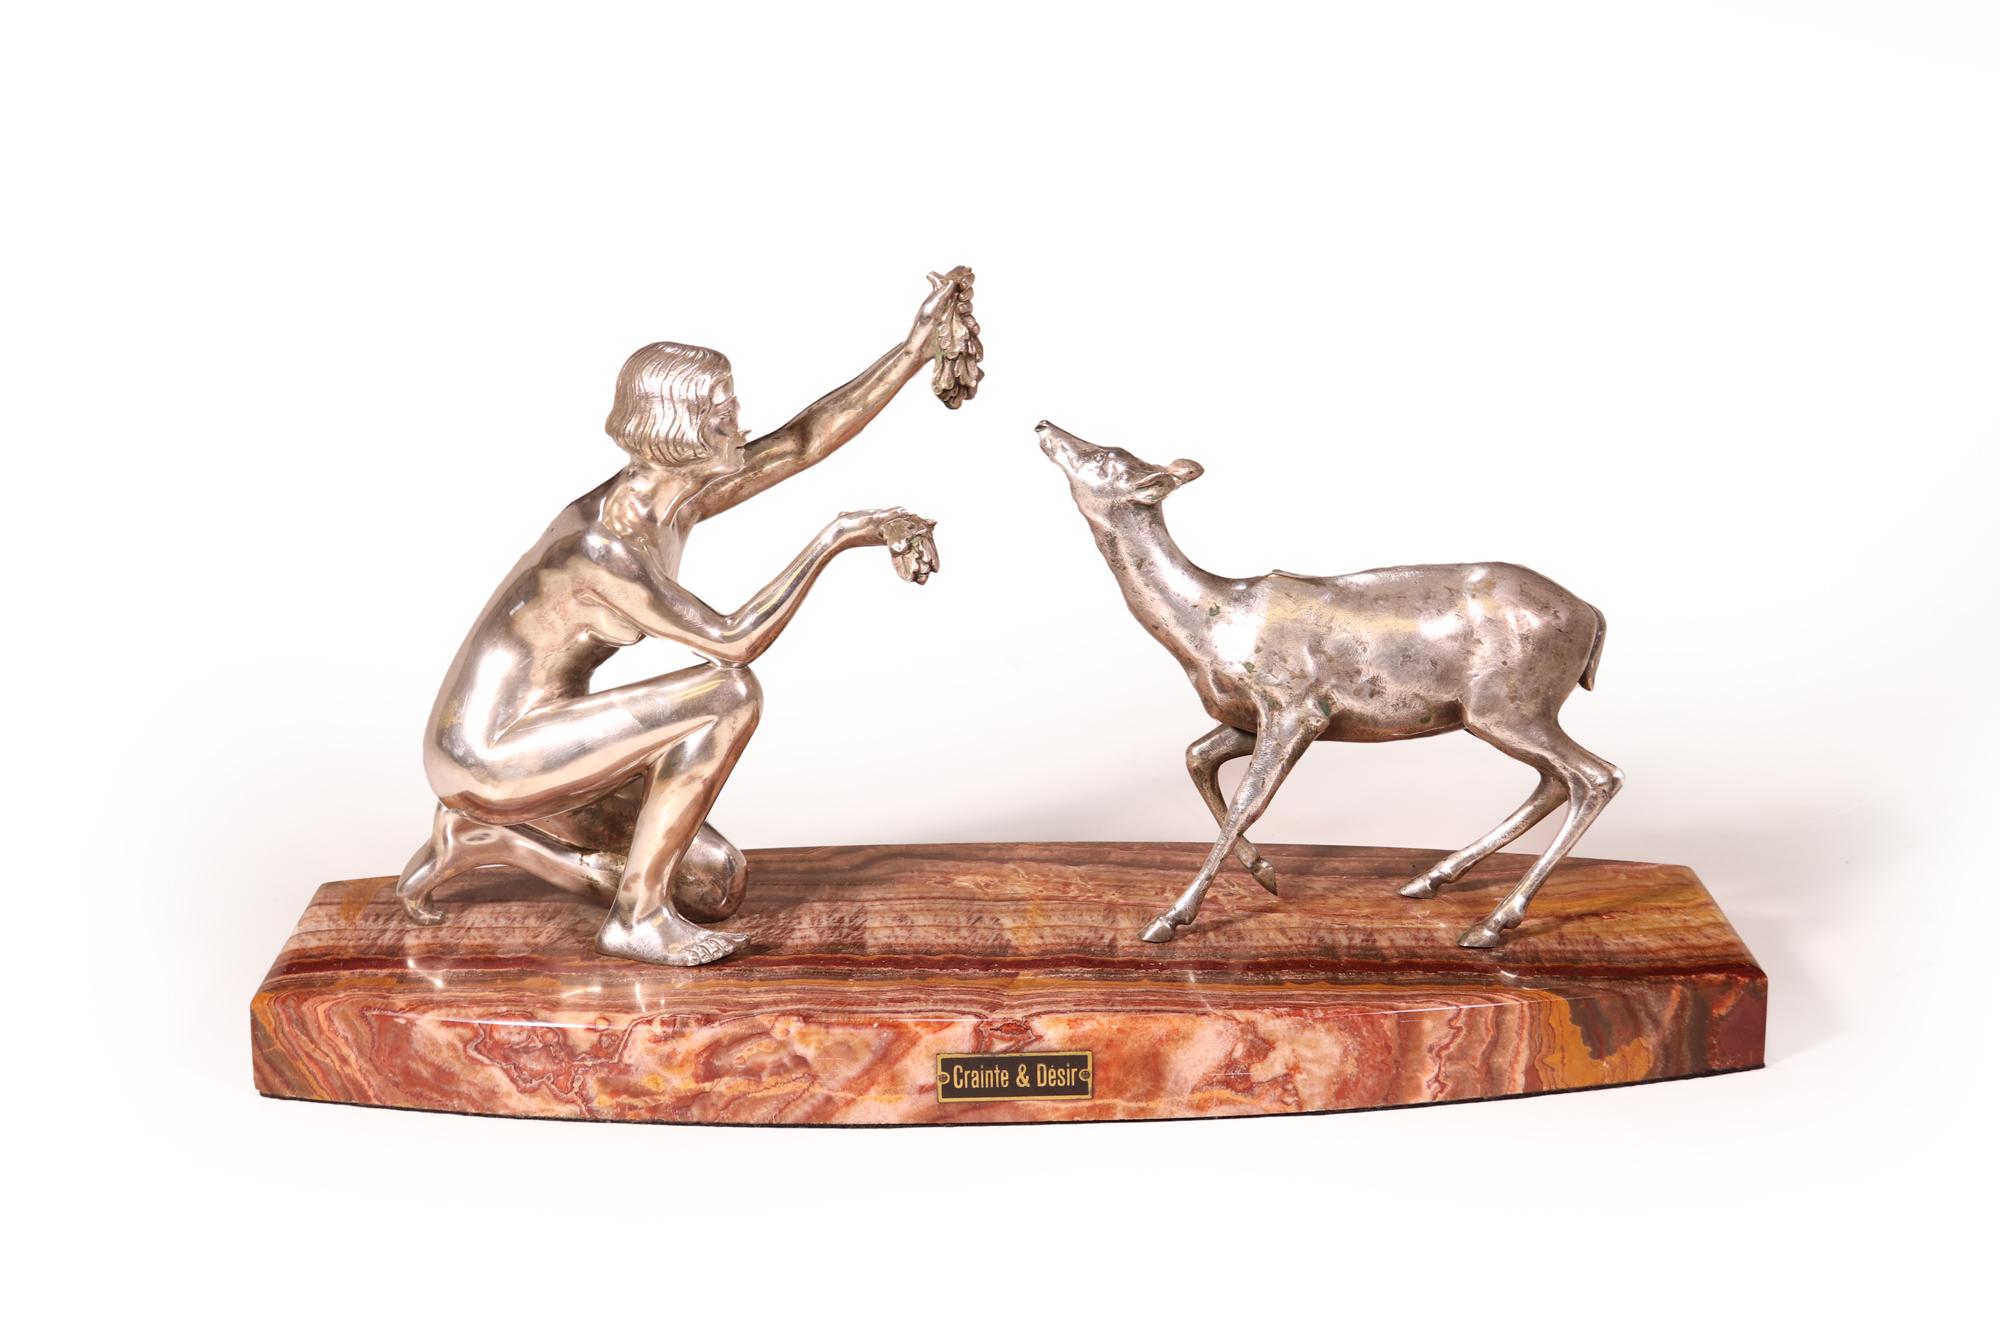 A stunning silvered bronze sculpture of lady feeding a baby deer produced in France by D,Arte this has been mounted to a stunning red onyx base overall very good condition some silver wear creating great patina

Age: 1930

Style: Art